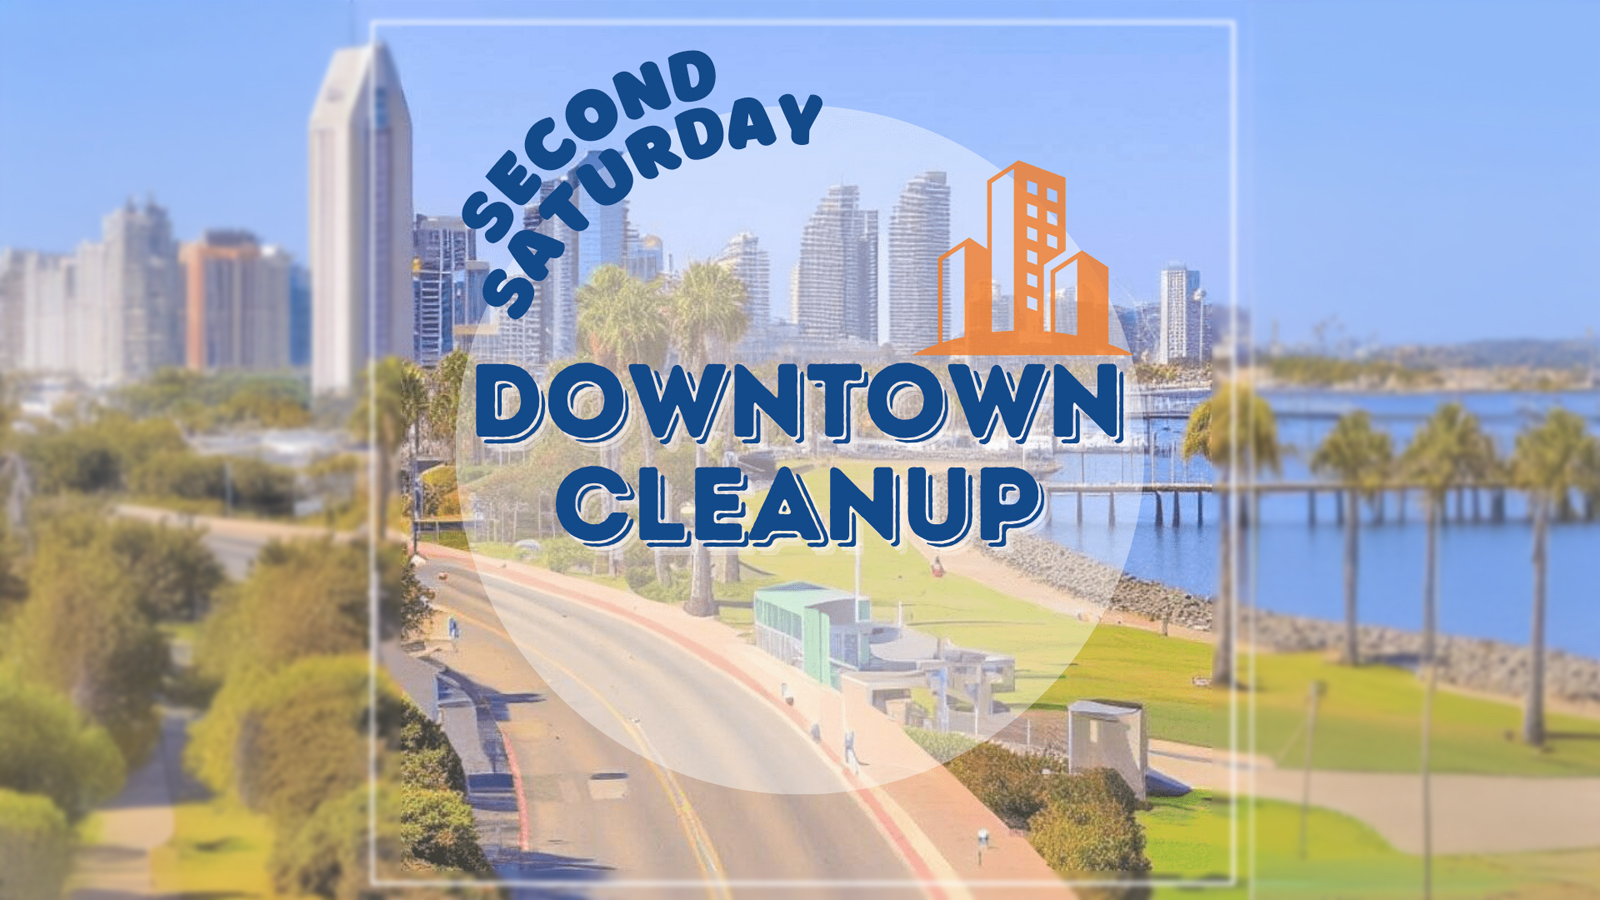 second saturday graphic image of downtown san diego